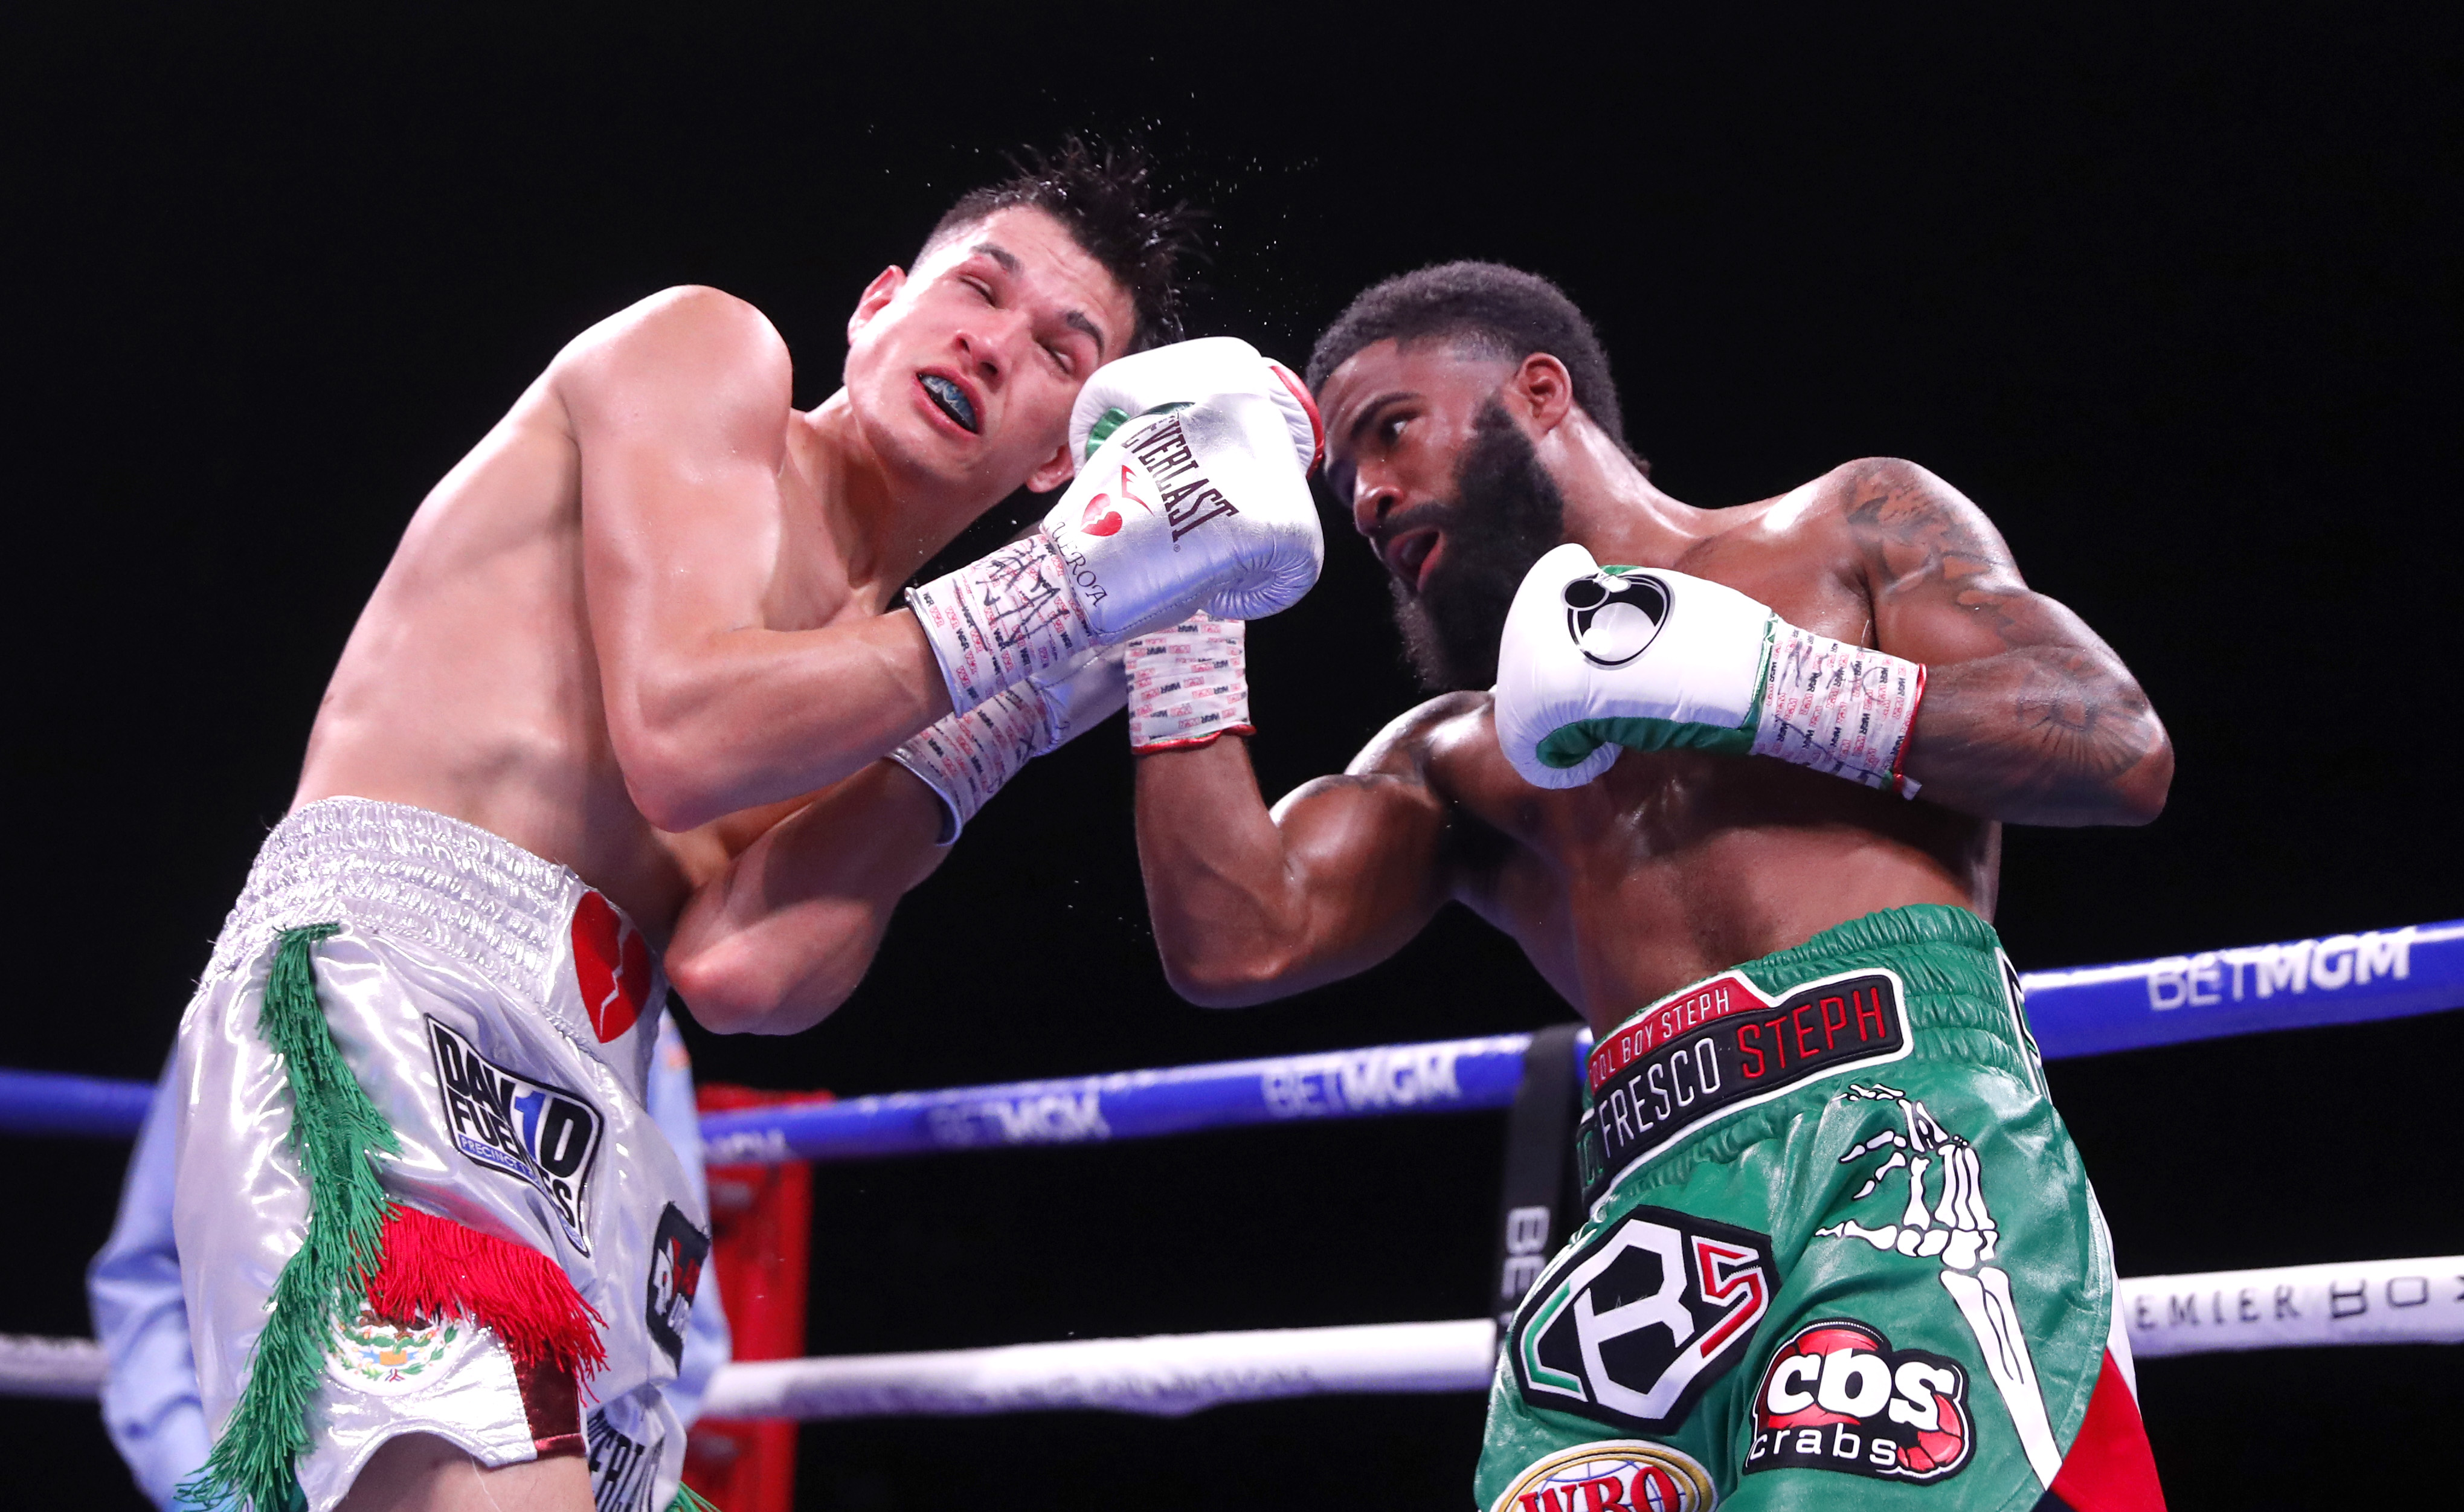 WBO champion Stephen Fulton Jr. (R) punches WBC champion Brandon Figueroa during a super bantamweight title unification fight at the Dolby Live at Park MGM theater on November 27, 2021 in Las Vegas, Nevada. Fulton Jr. won the WBC title from Figueroa by majority decision.